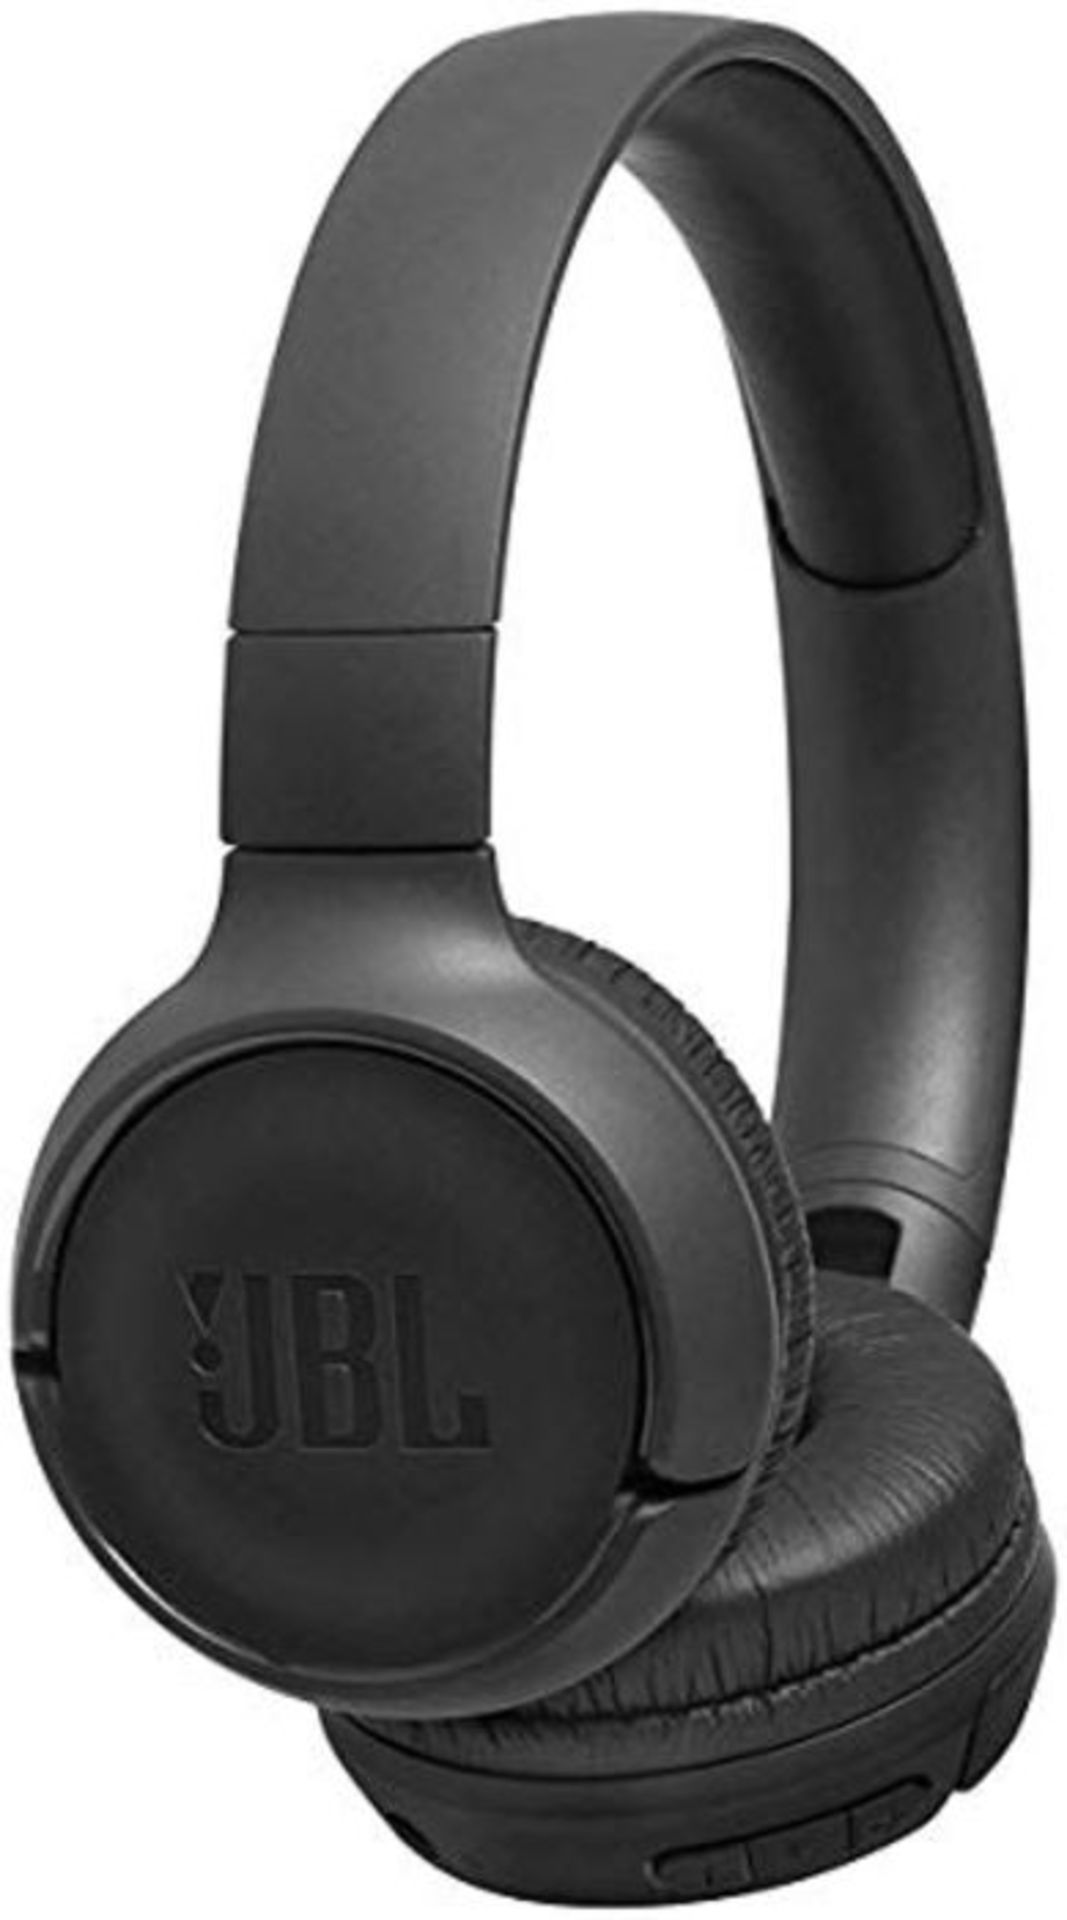 JBL T500BT in Black - Over Ear Bluetooth Wireless Headphones with Pure Bass Sound - He